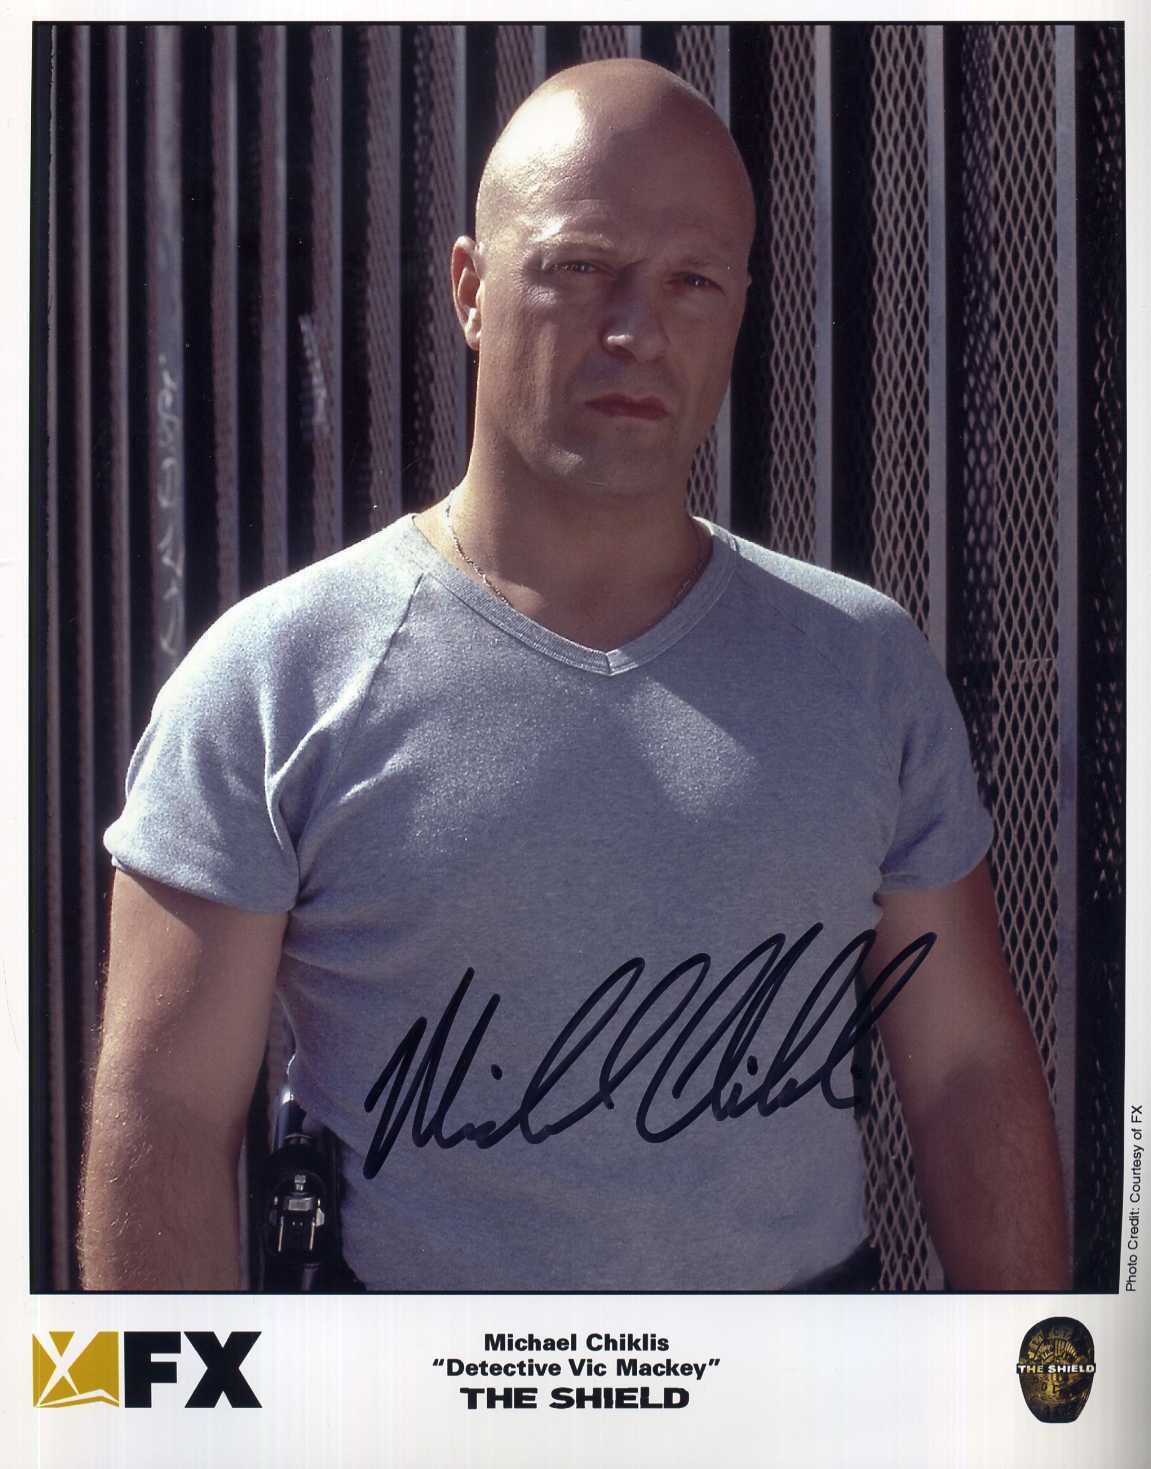 MICHAEL CHIKLIS Signed 'The Shield' Photo Poster paintinggraph - TV & Film Actor - preprint